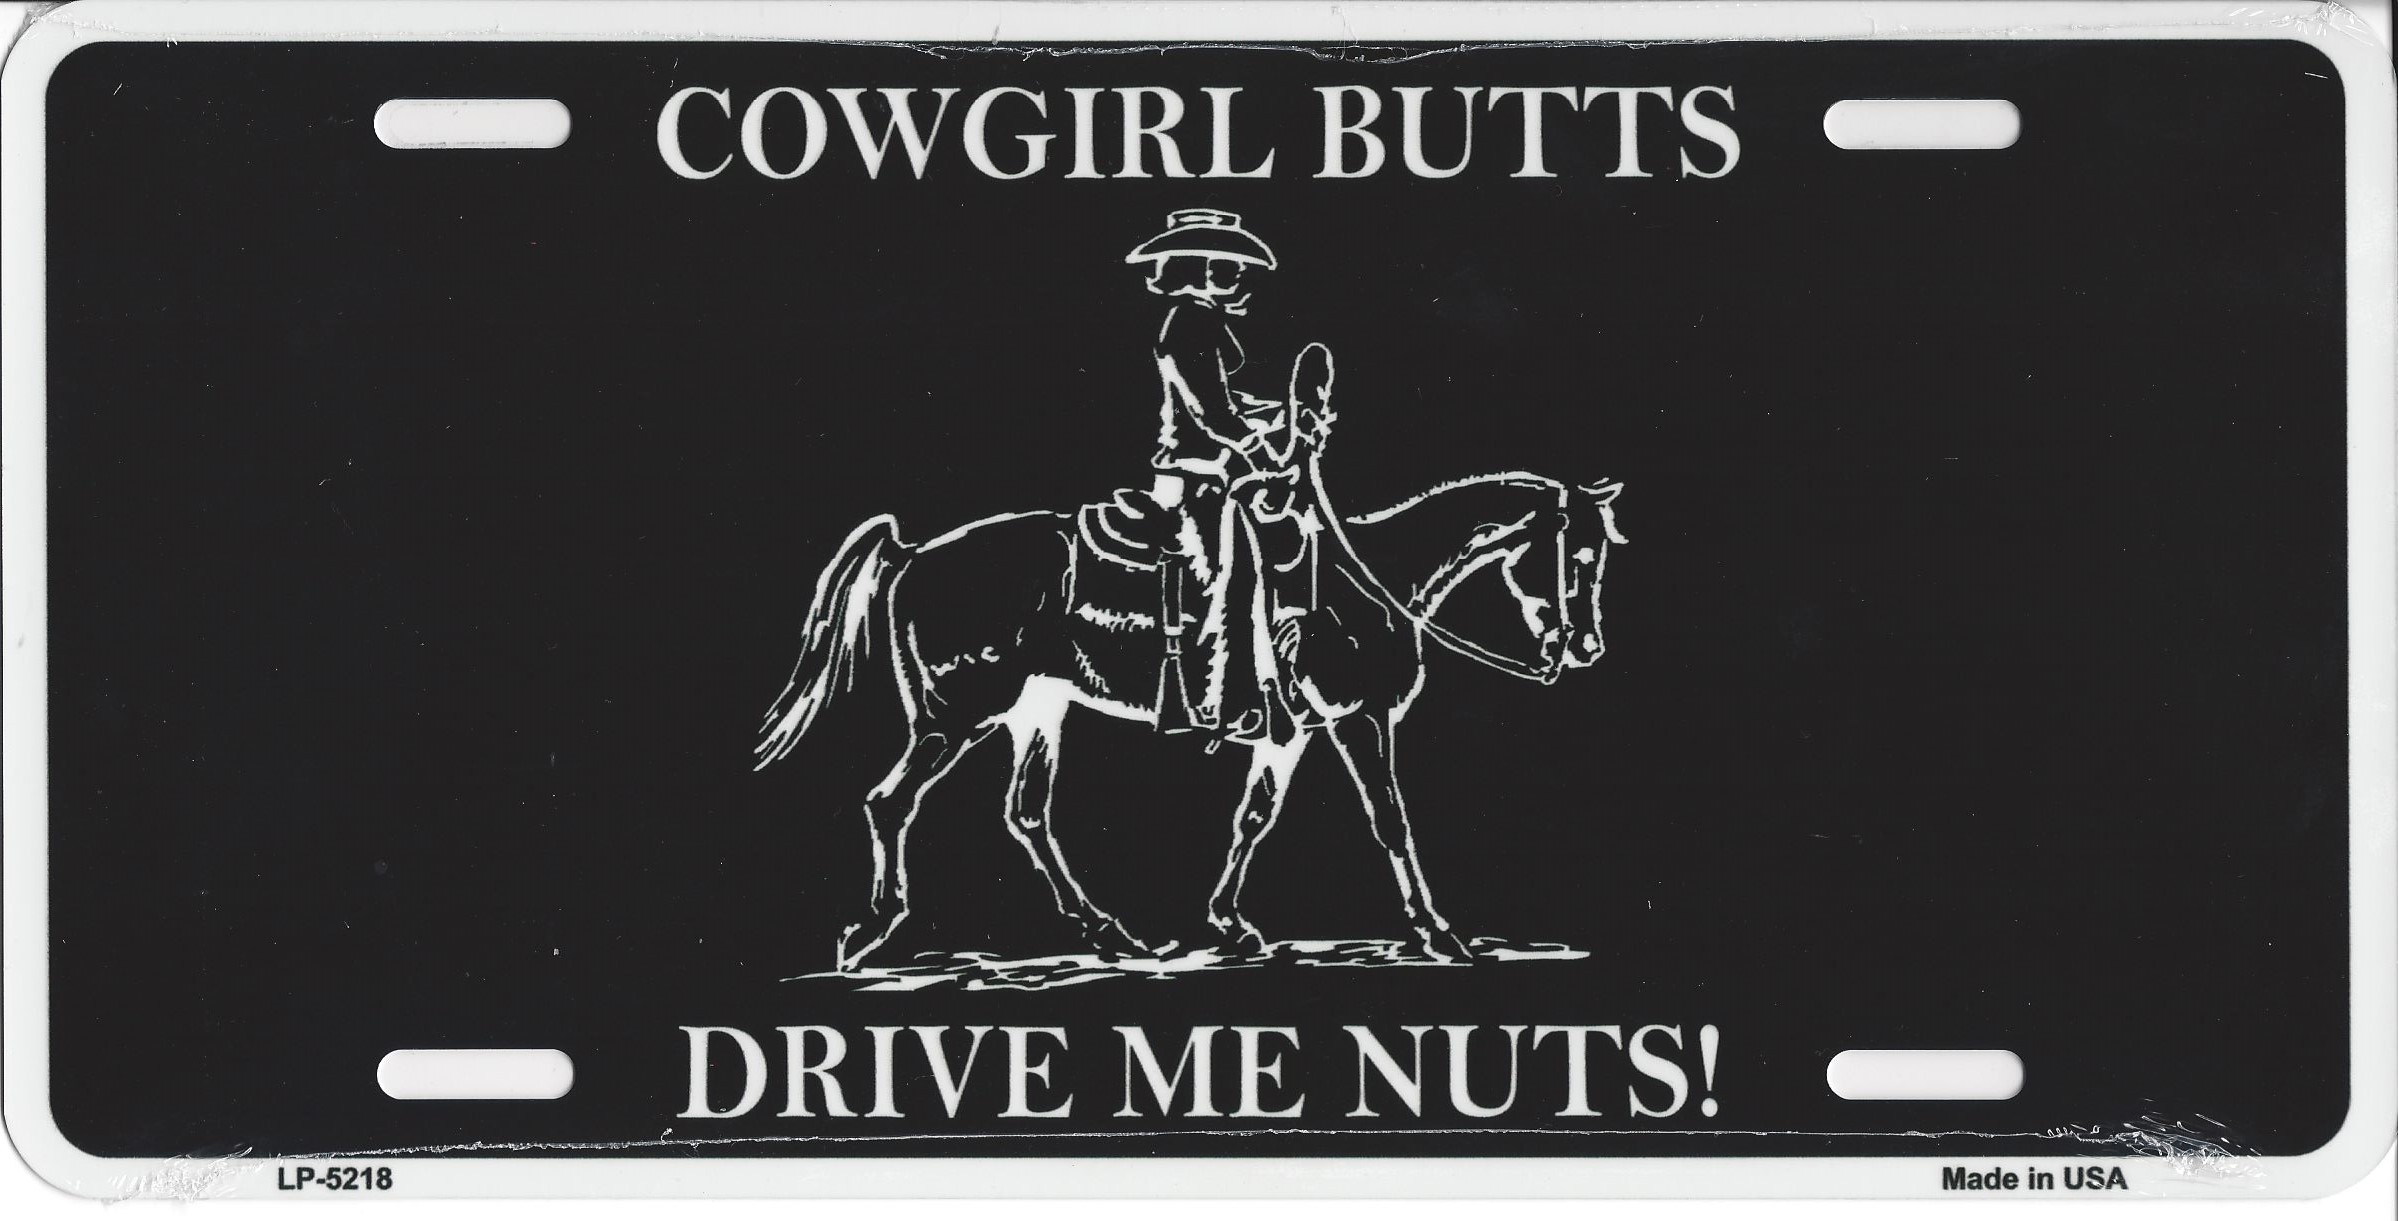 Cowgirl Butts Drive Me Nuts! LICENSE PLATE